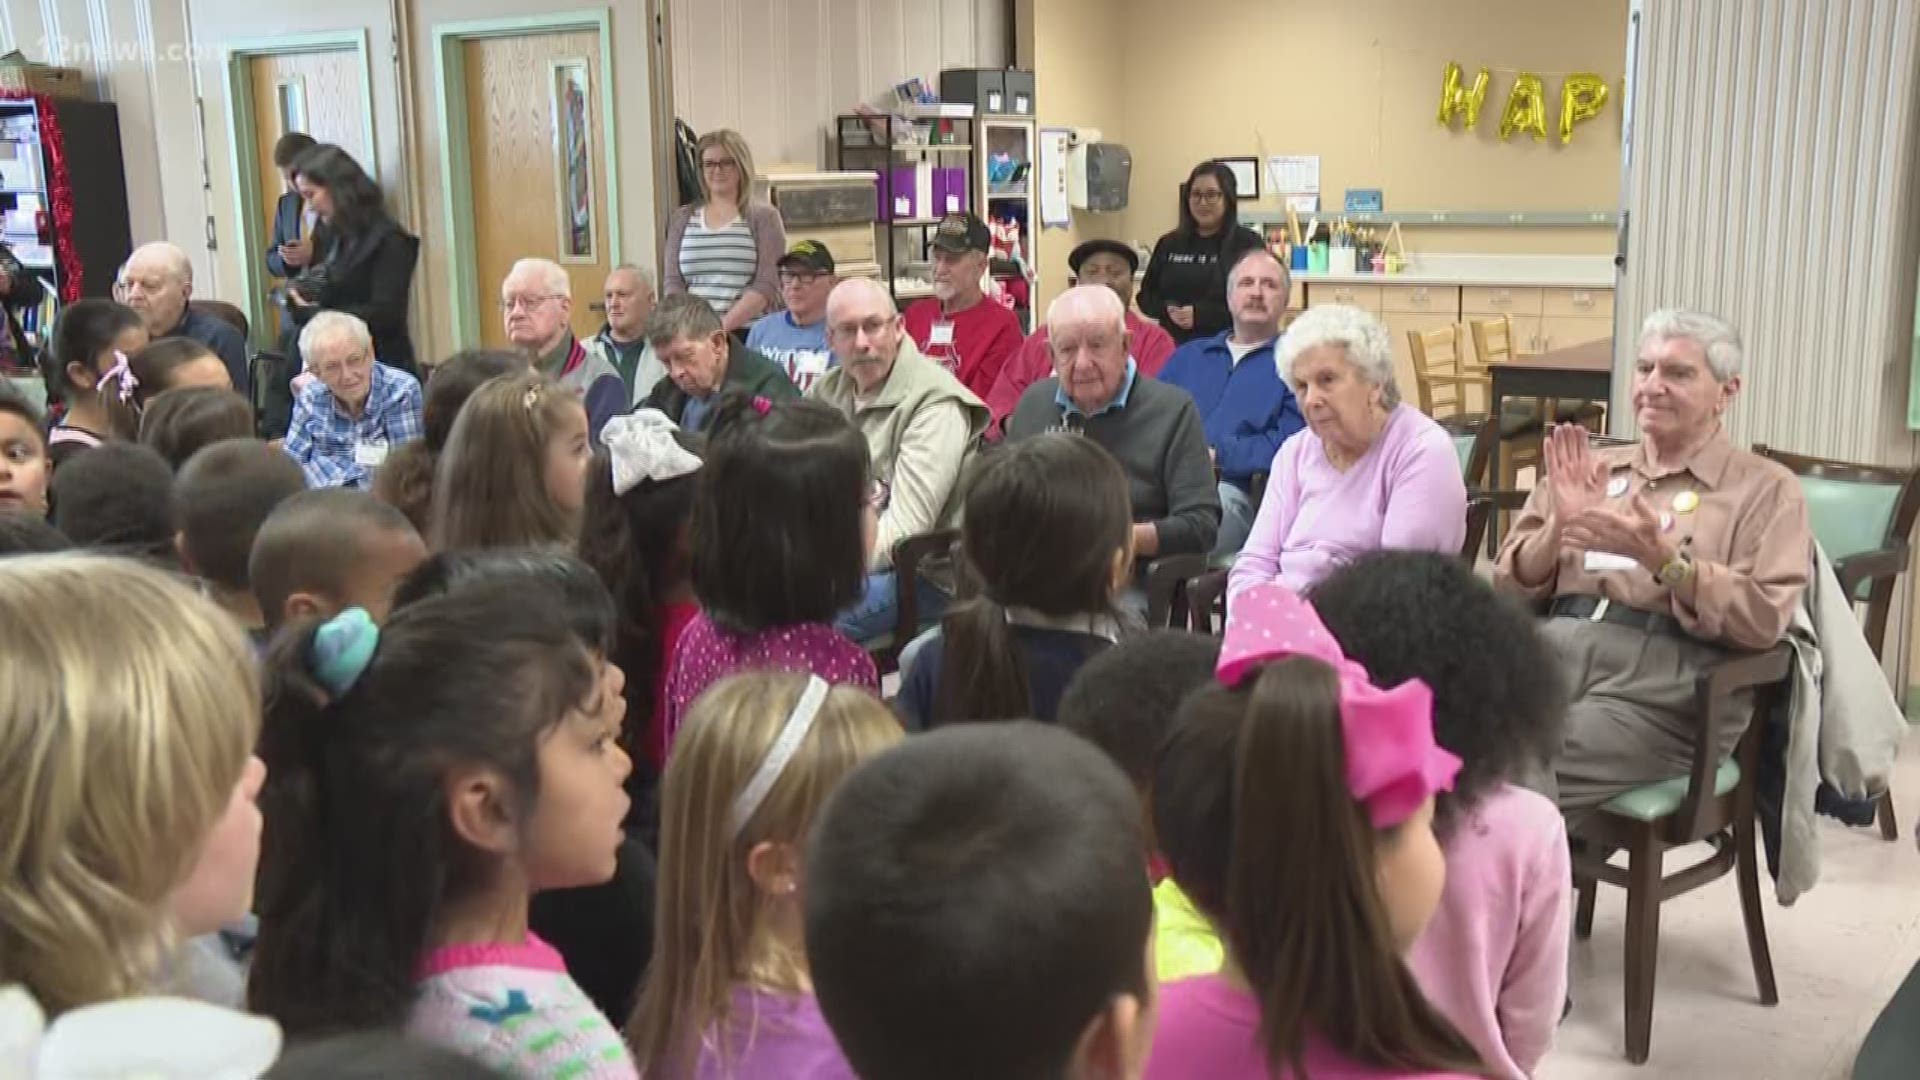 More than 100 elementary students in Tempe are pen pals with senior citizens thanks to a program by Amy Garza.